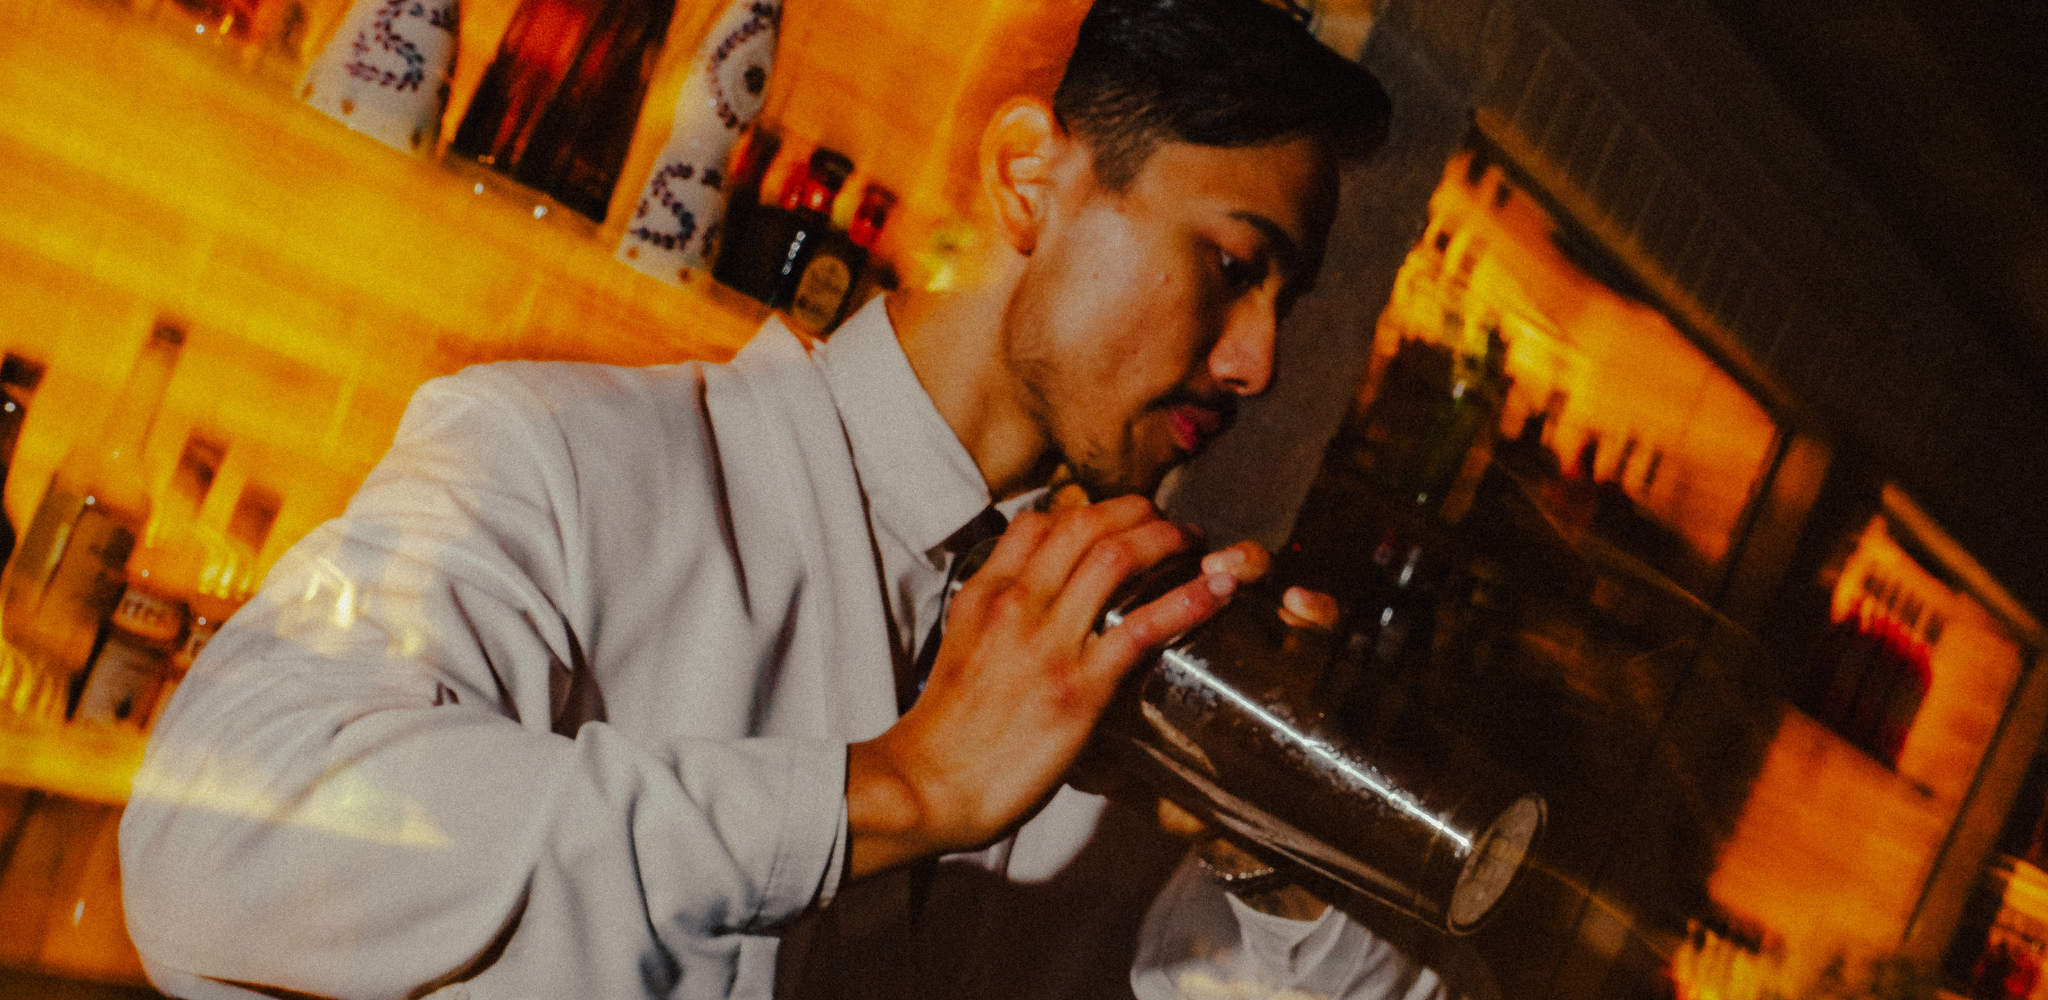 Image of a bartender shaking up a signature cocktail on the Rooftop bar at Jacksons on George.